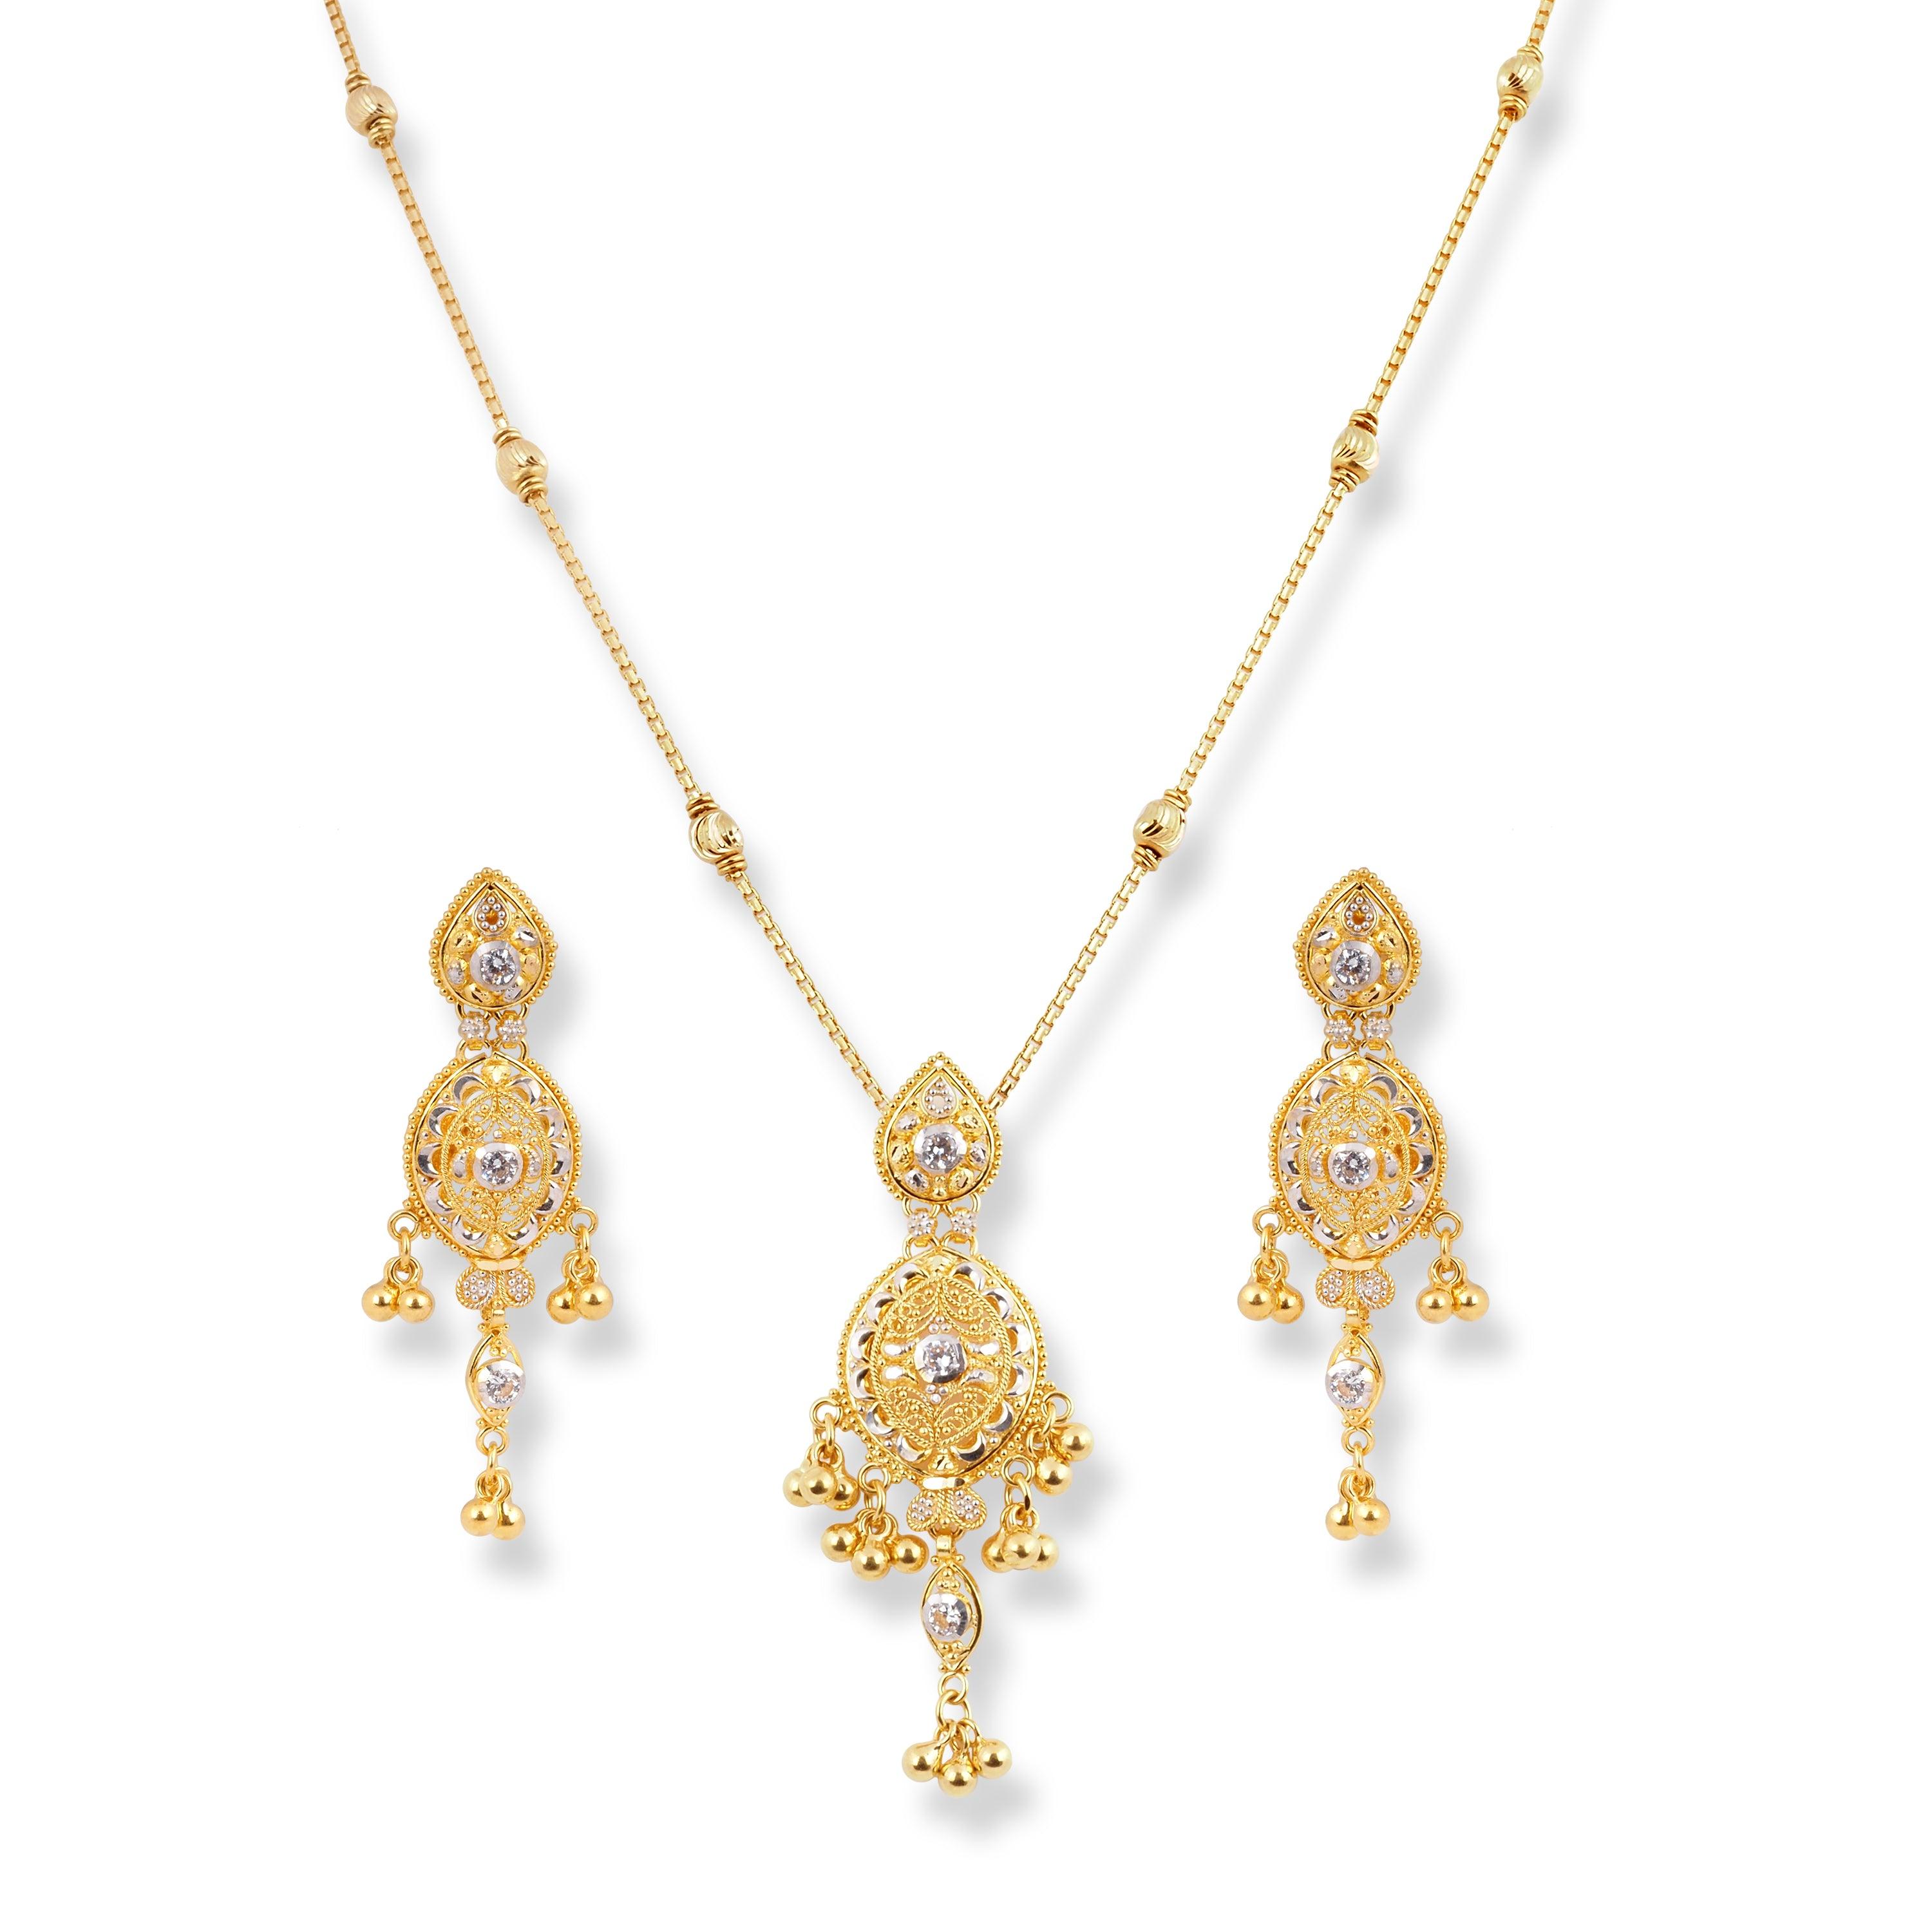 22ct Yellow Gold Necklace & Earrings in Cubic Zirconia Stones & Rhodium Plating Design - Minar Jewellers